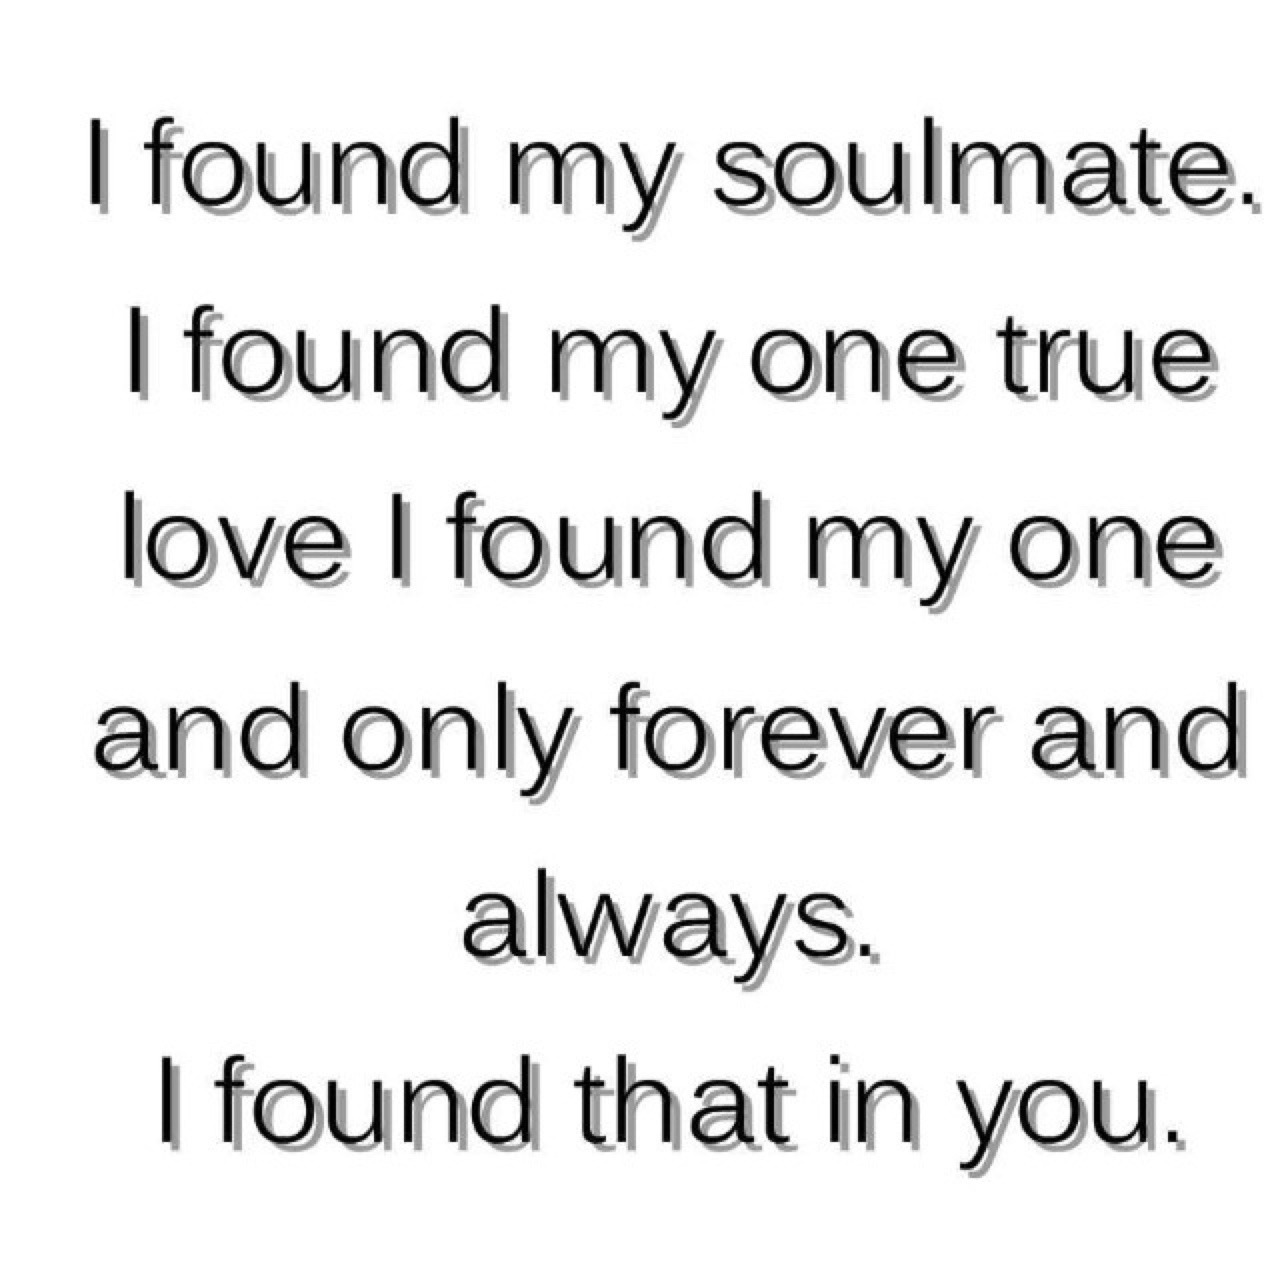 My true love forever soulmate true love relationship relationship quotes long distant relationship i love her